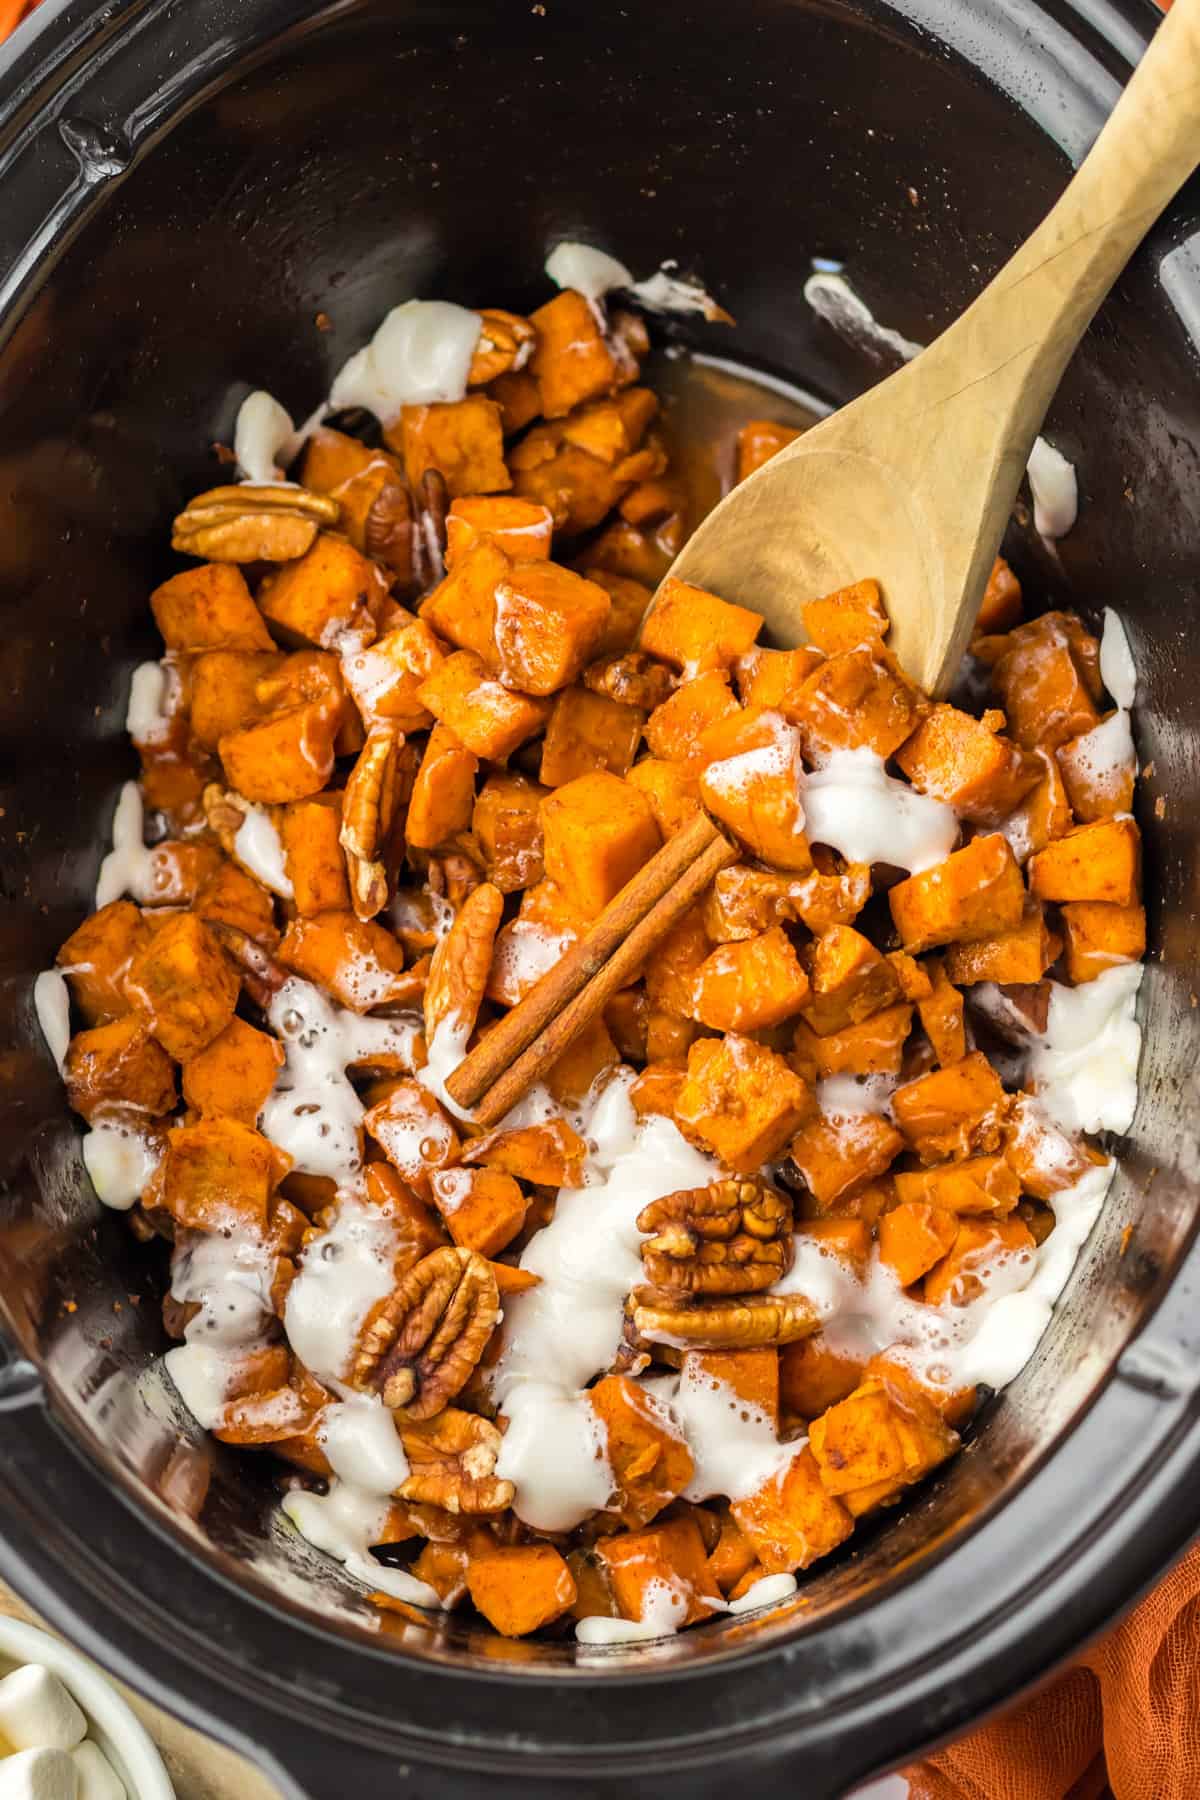 Crockpot sweet potato casserole with wooden spoon in it and leaning on the side of the insert.